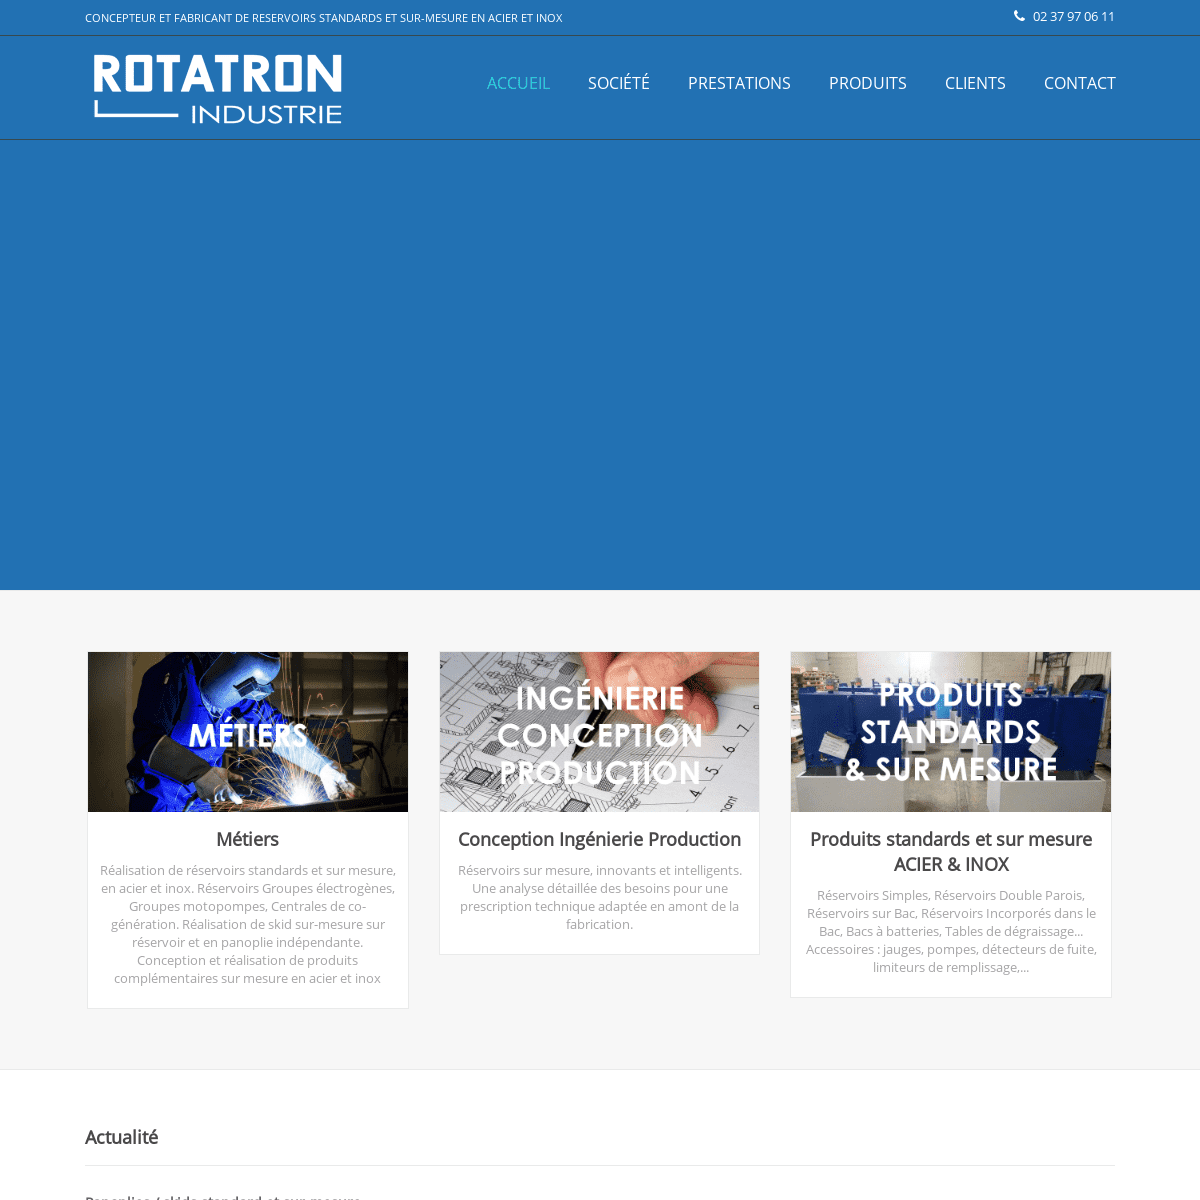 A complete backup of https://rotatron-industrie.com